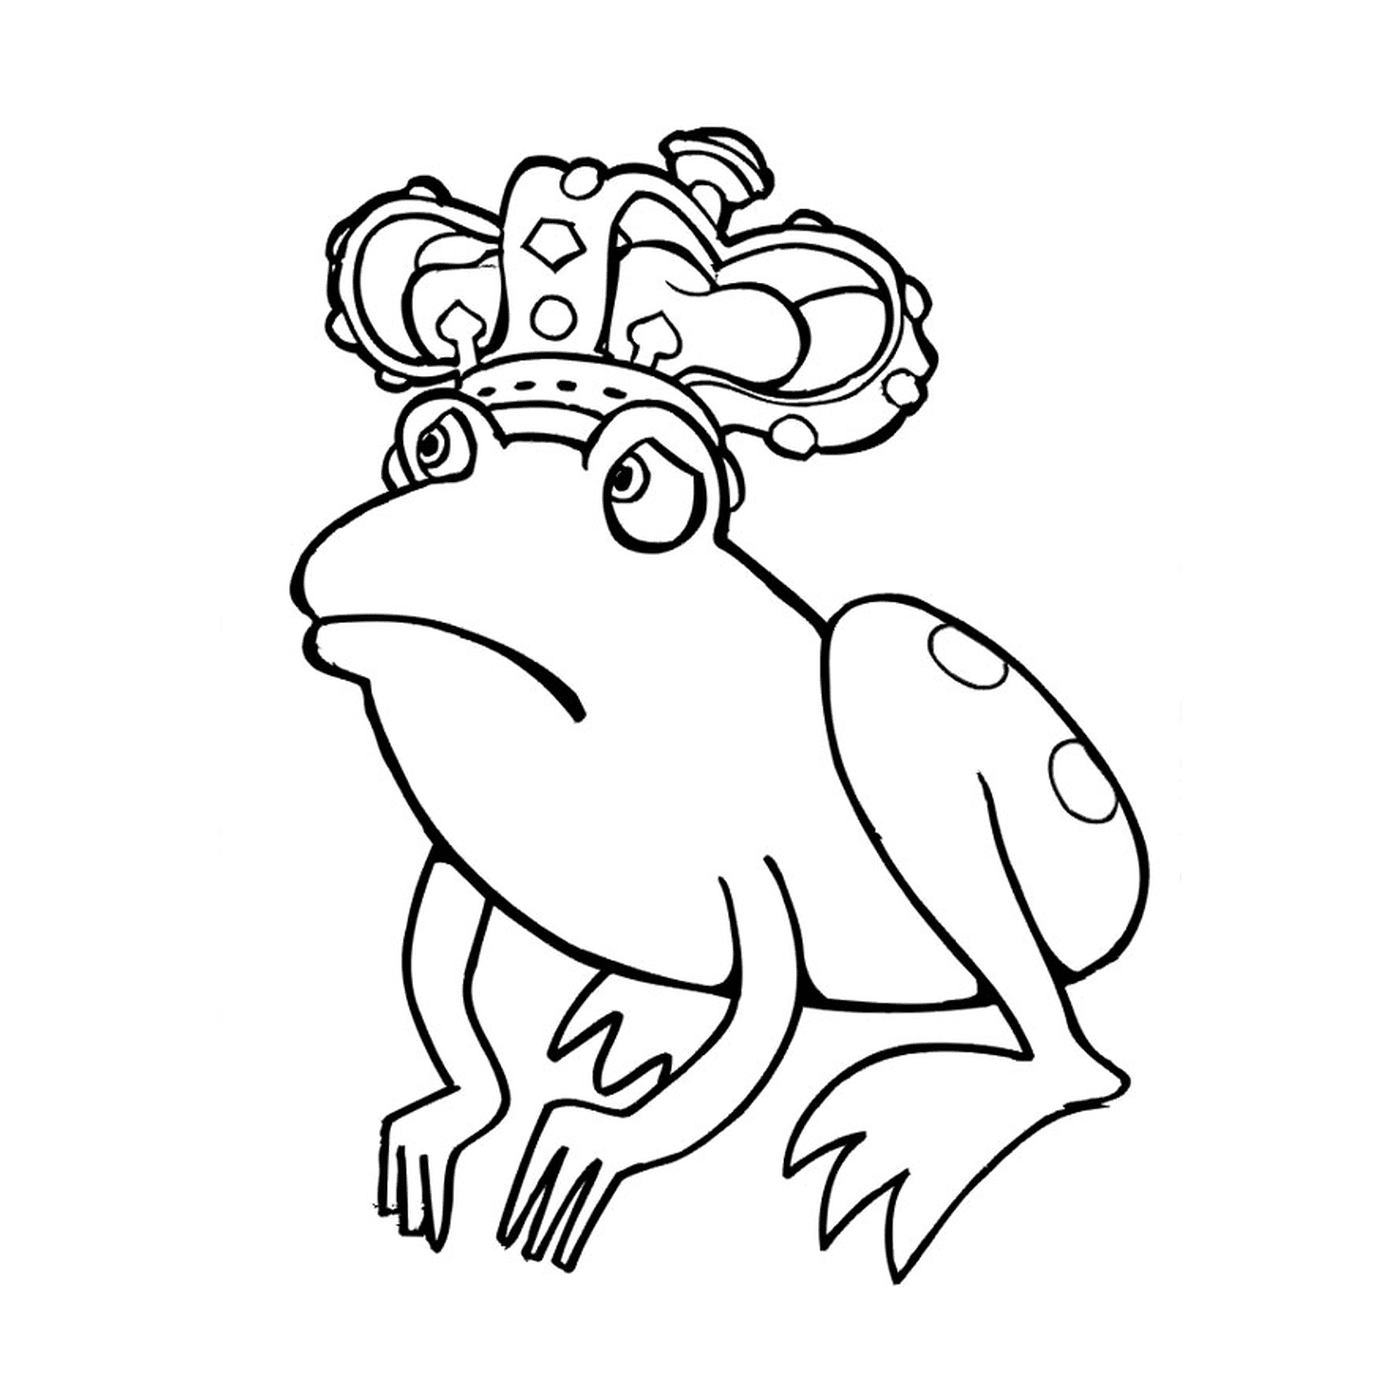  Frog carrying a crown 